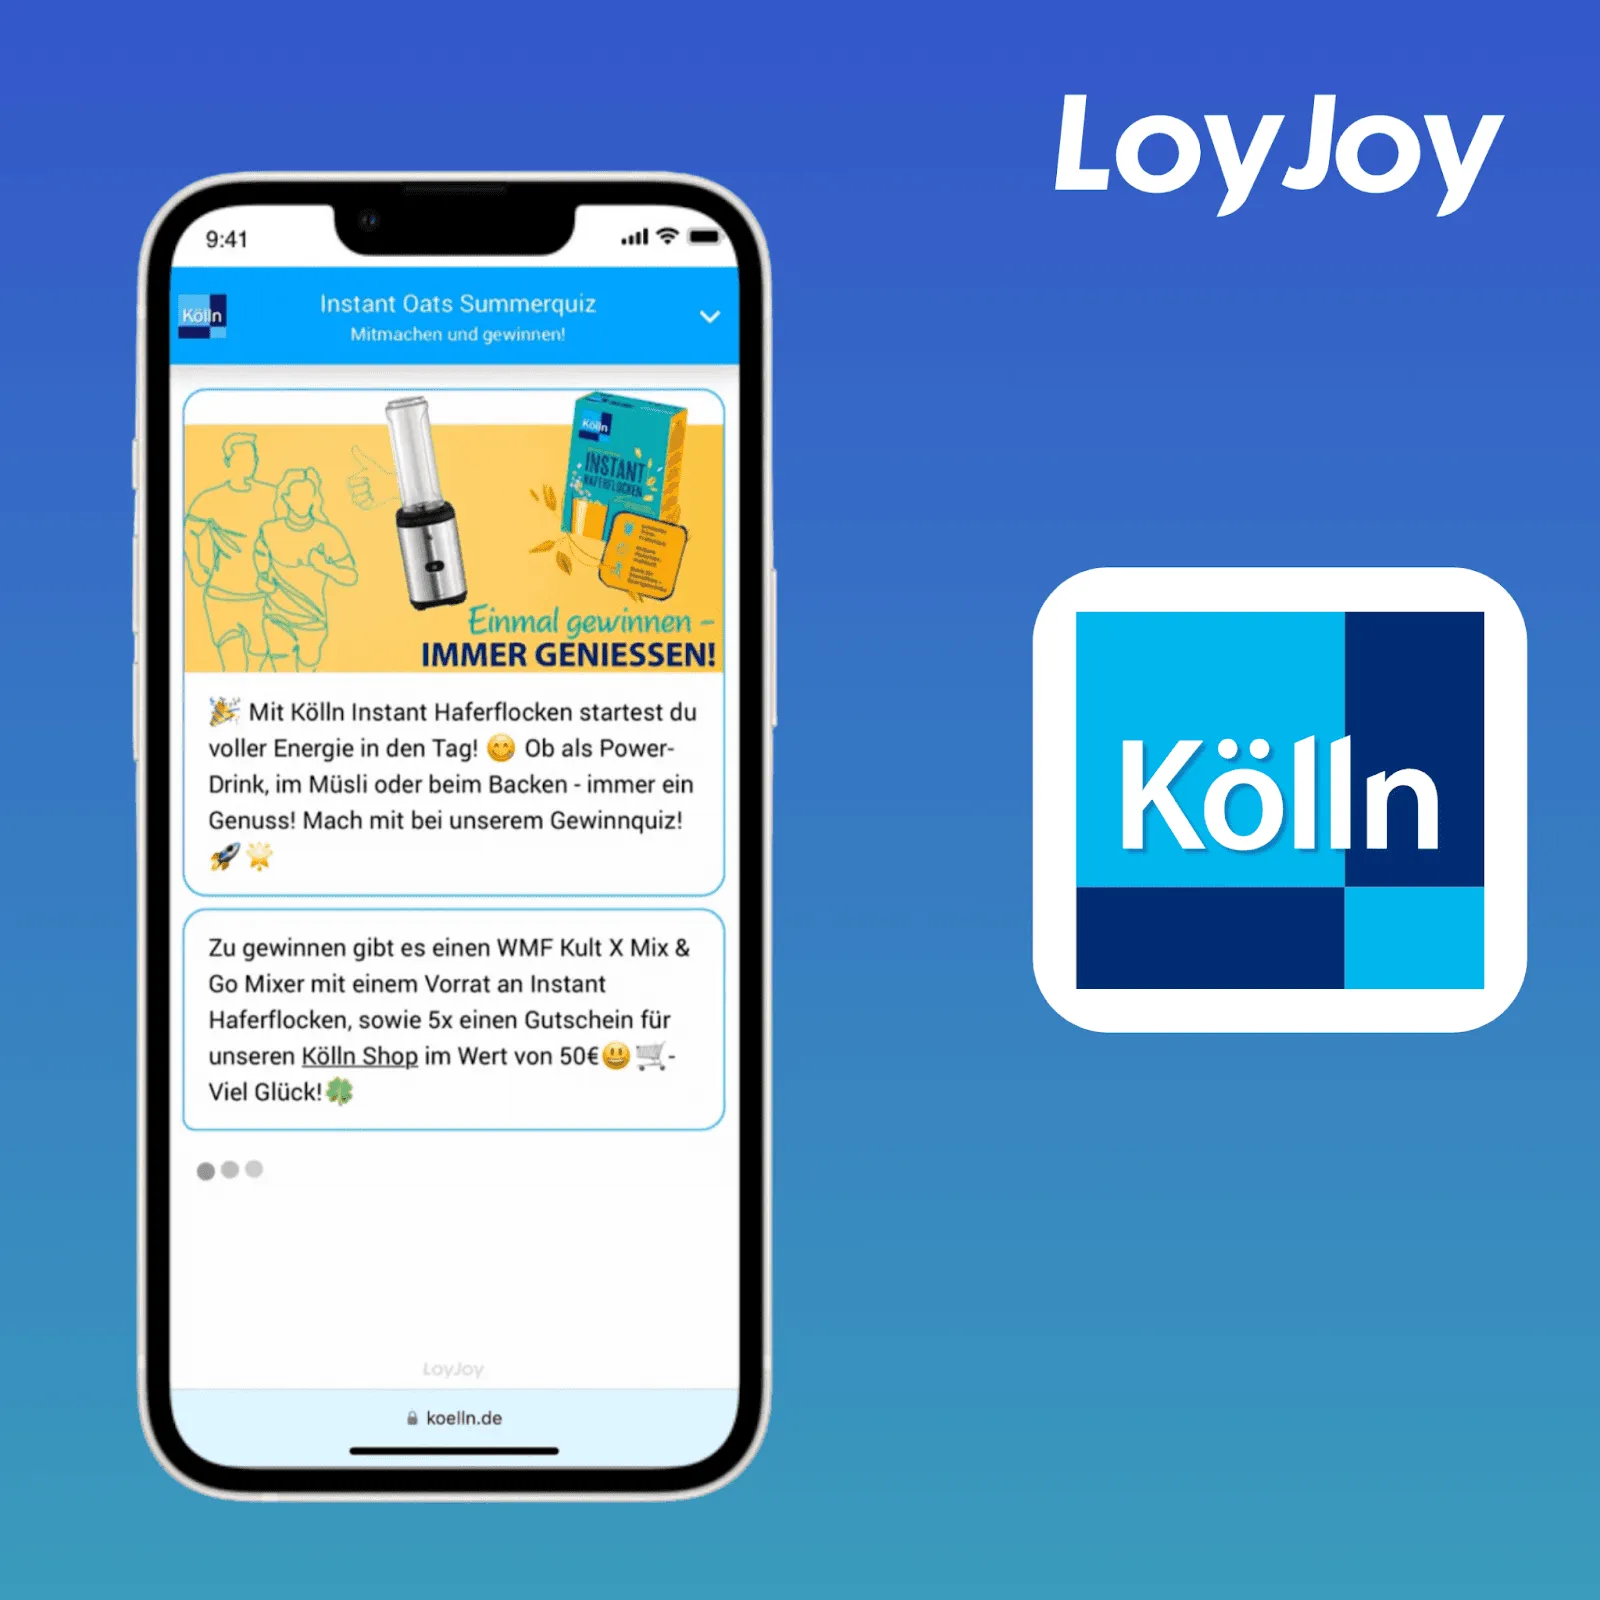 The Kölln raffle experience is displayed on a smartphone.